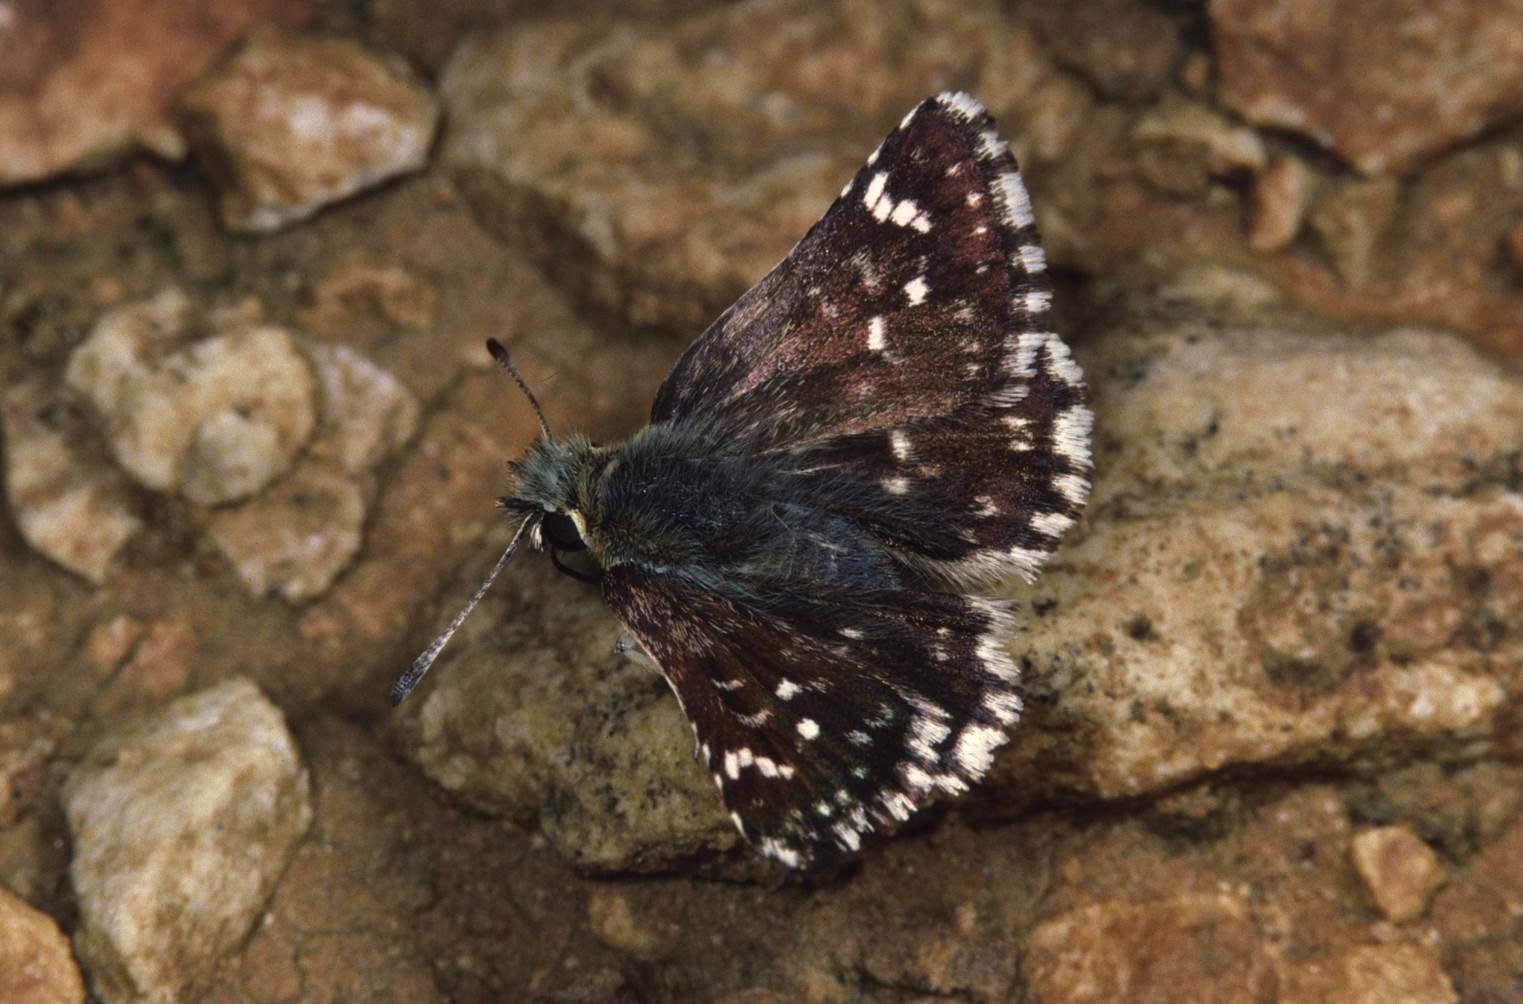 A moth on a rock

Description automatically generated with medium confidence